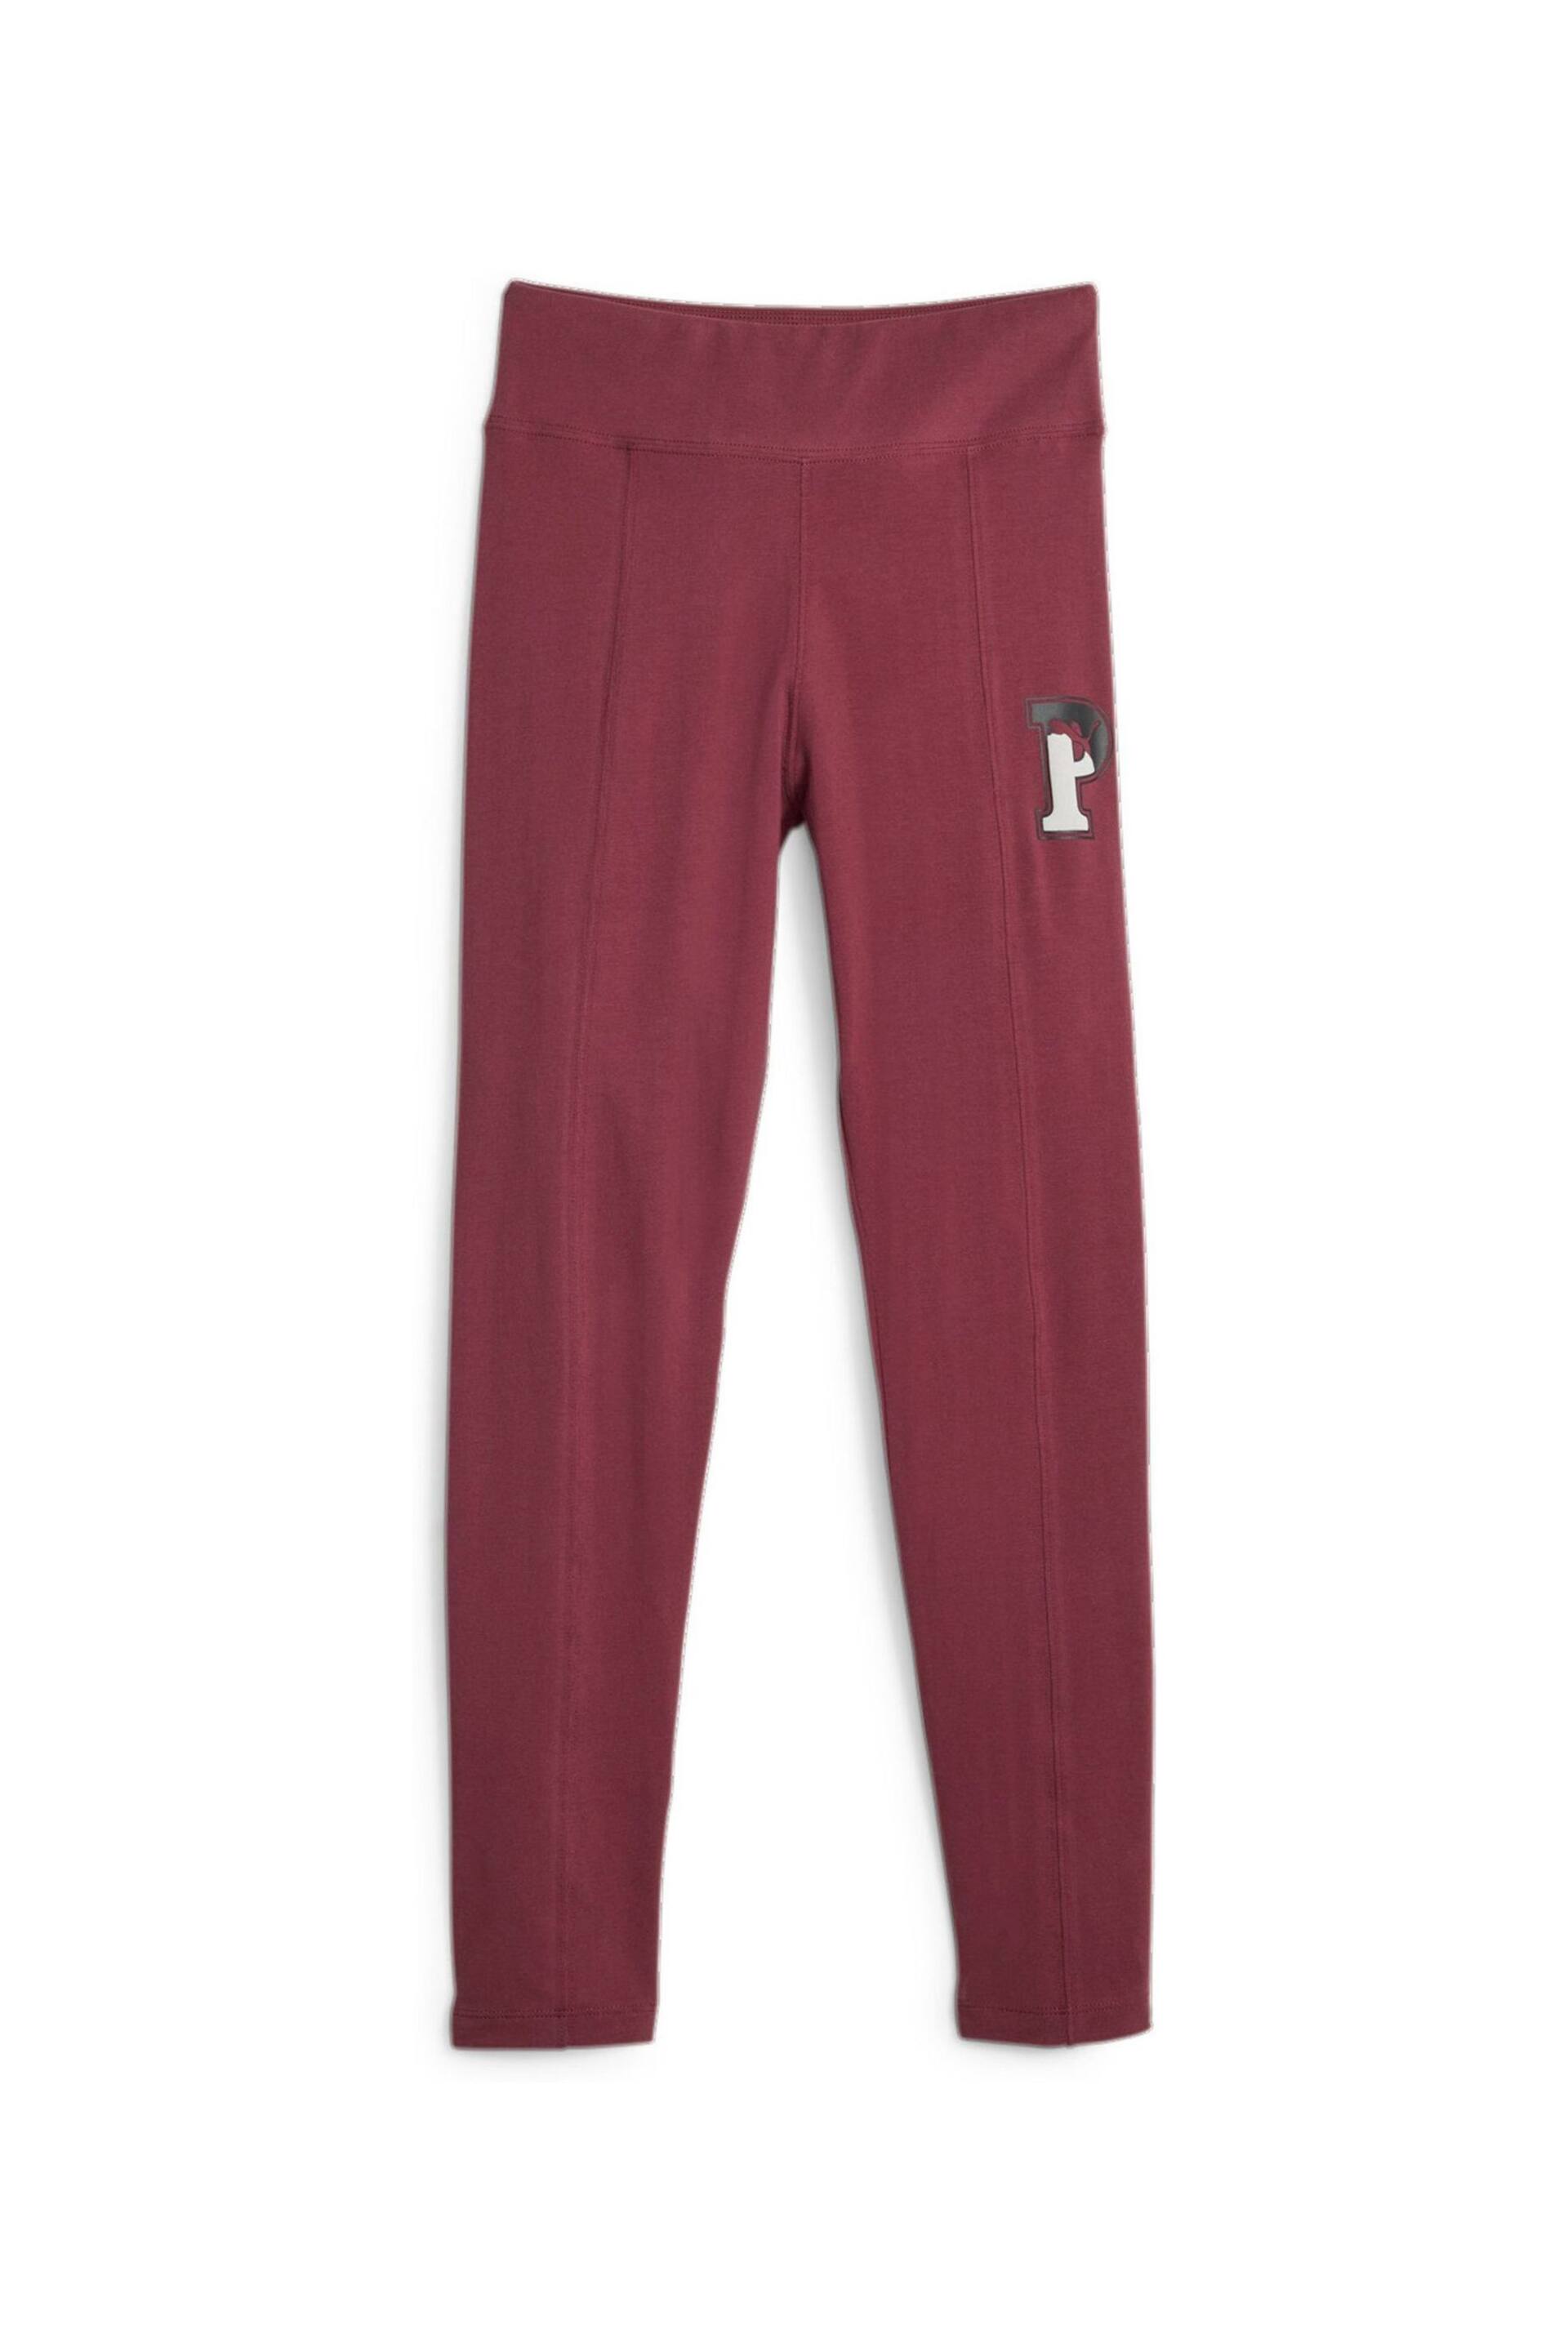 Puma Red Squad Youth High-Waist Leggings - Image 1 of 2